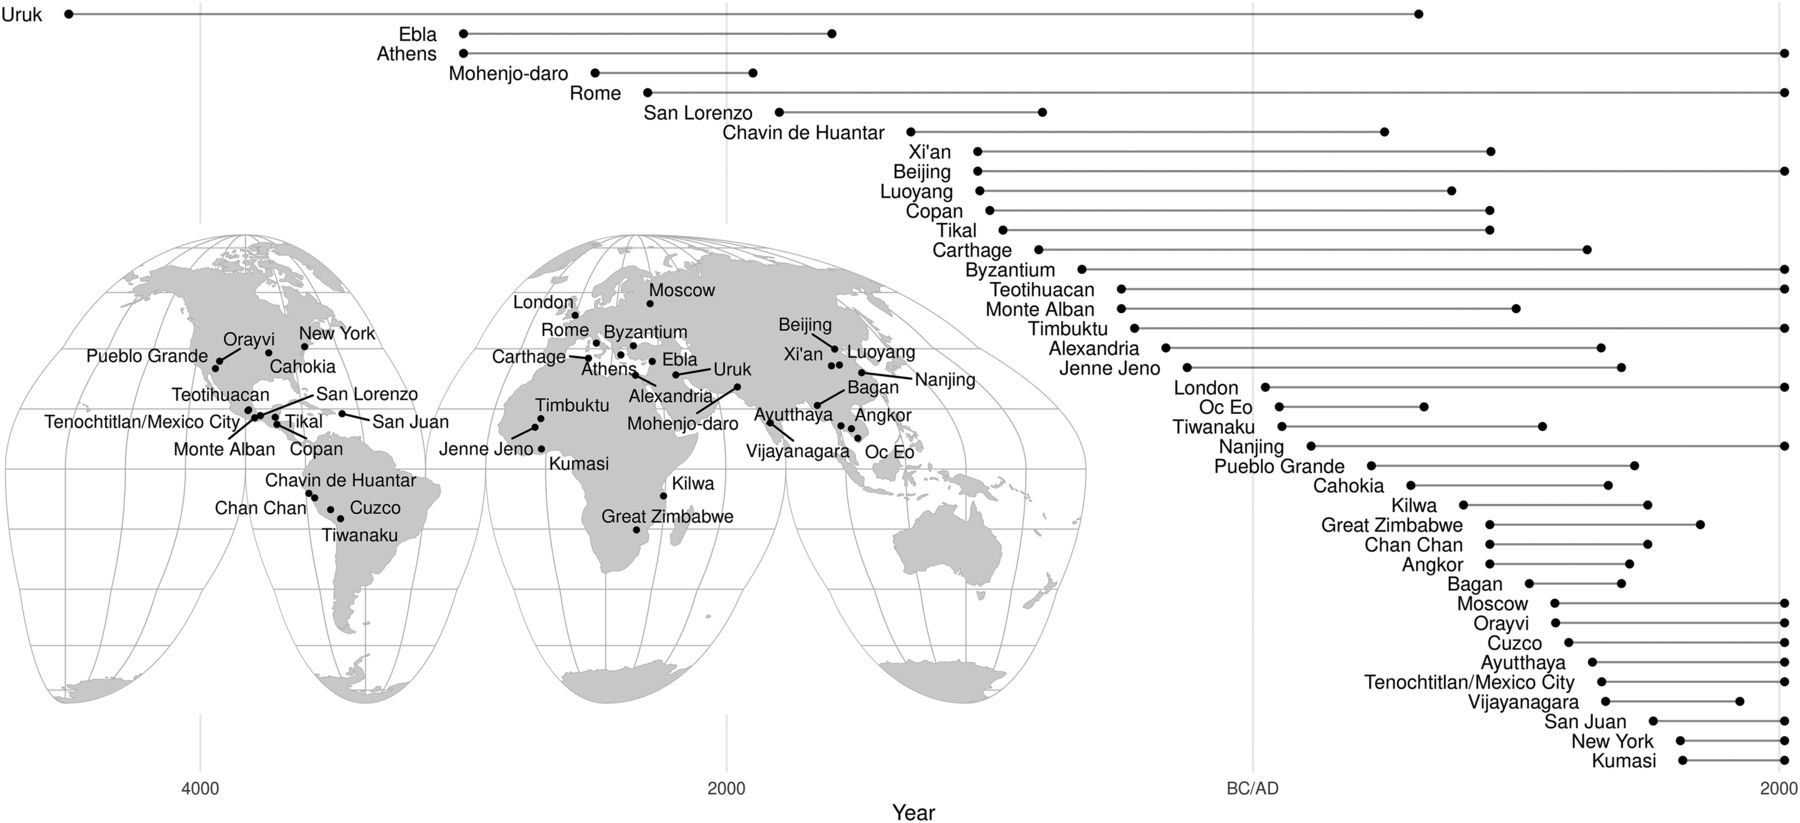 World map depicting cities throughout history and their durations through time. 